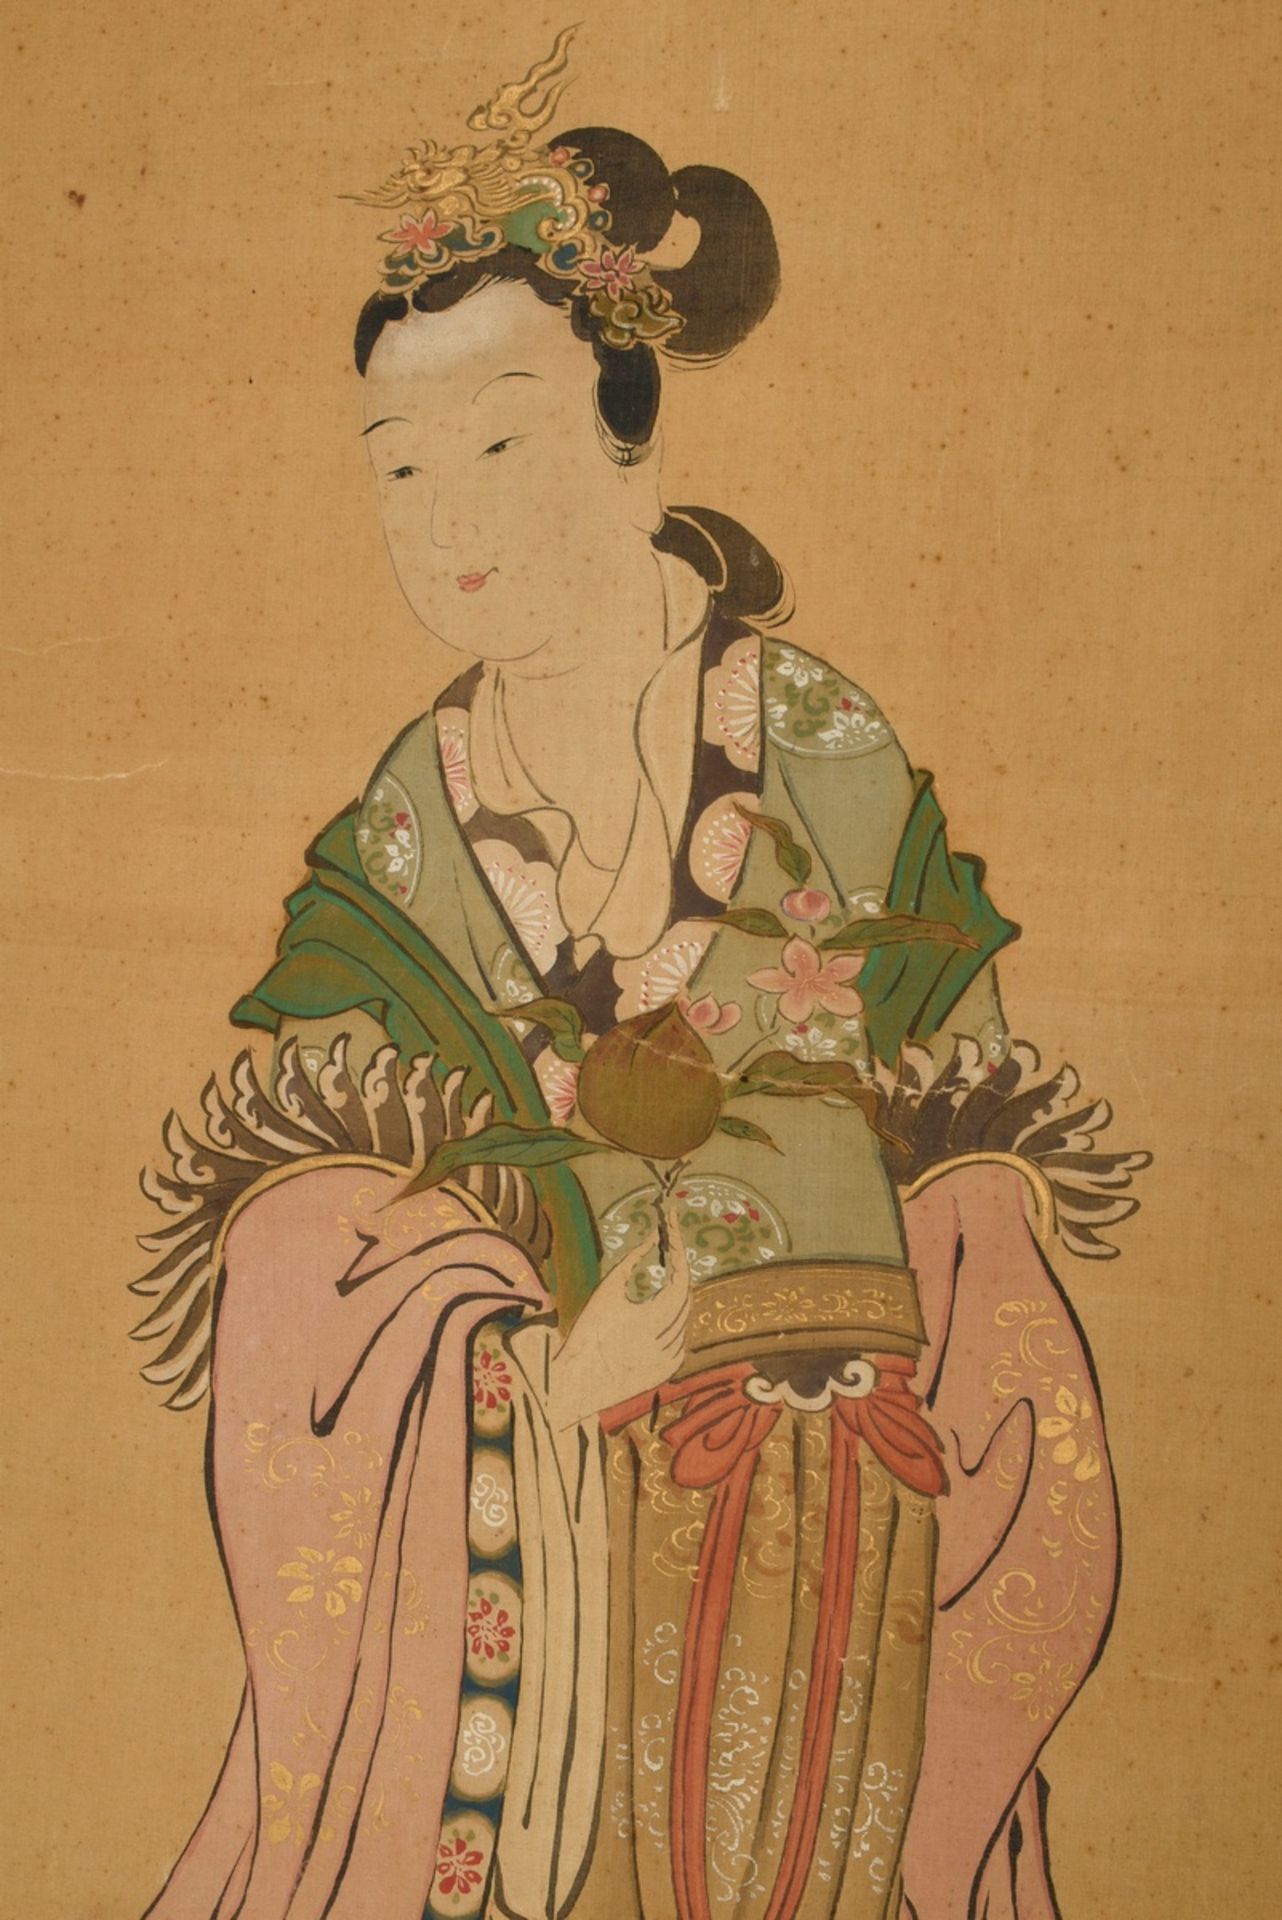 Japanese scroll painting "Seiobo, the Queen Mother of the West waits for a message", ukiyo-e painti - Image 5 of 9